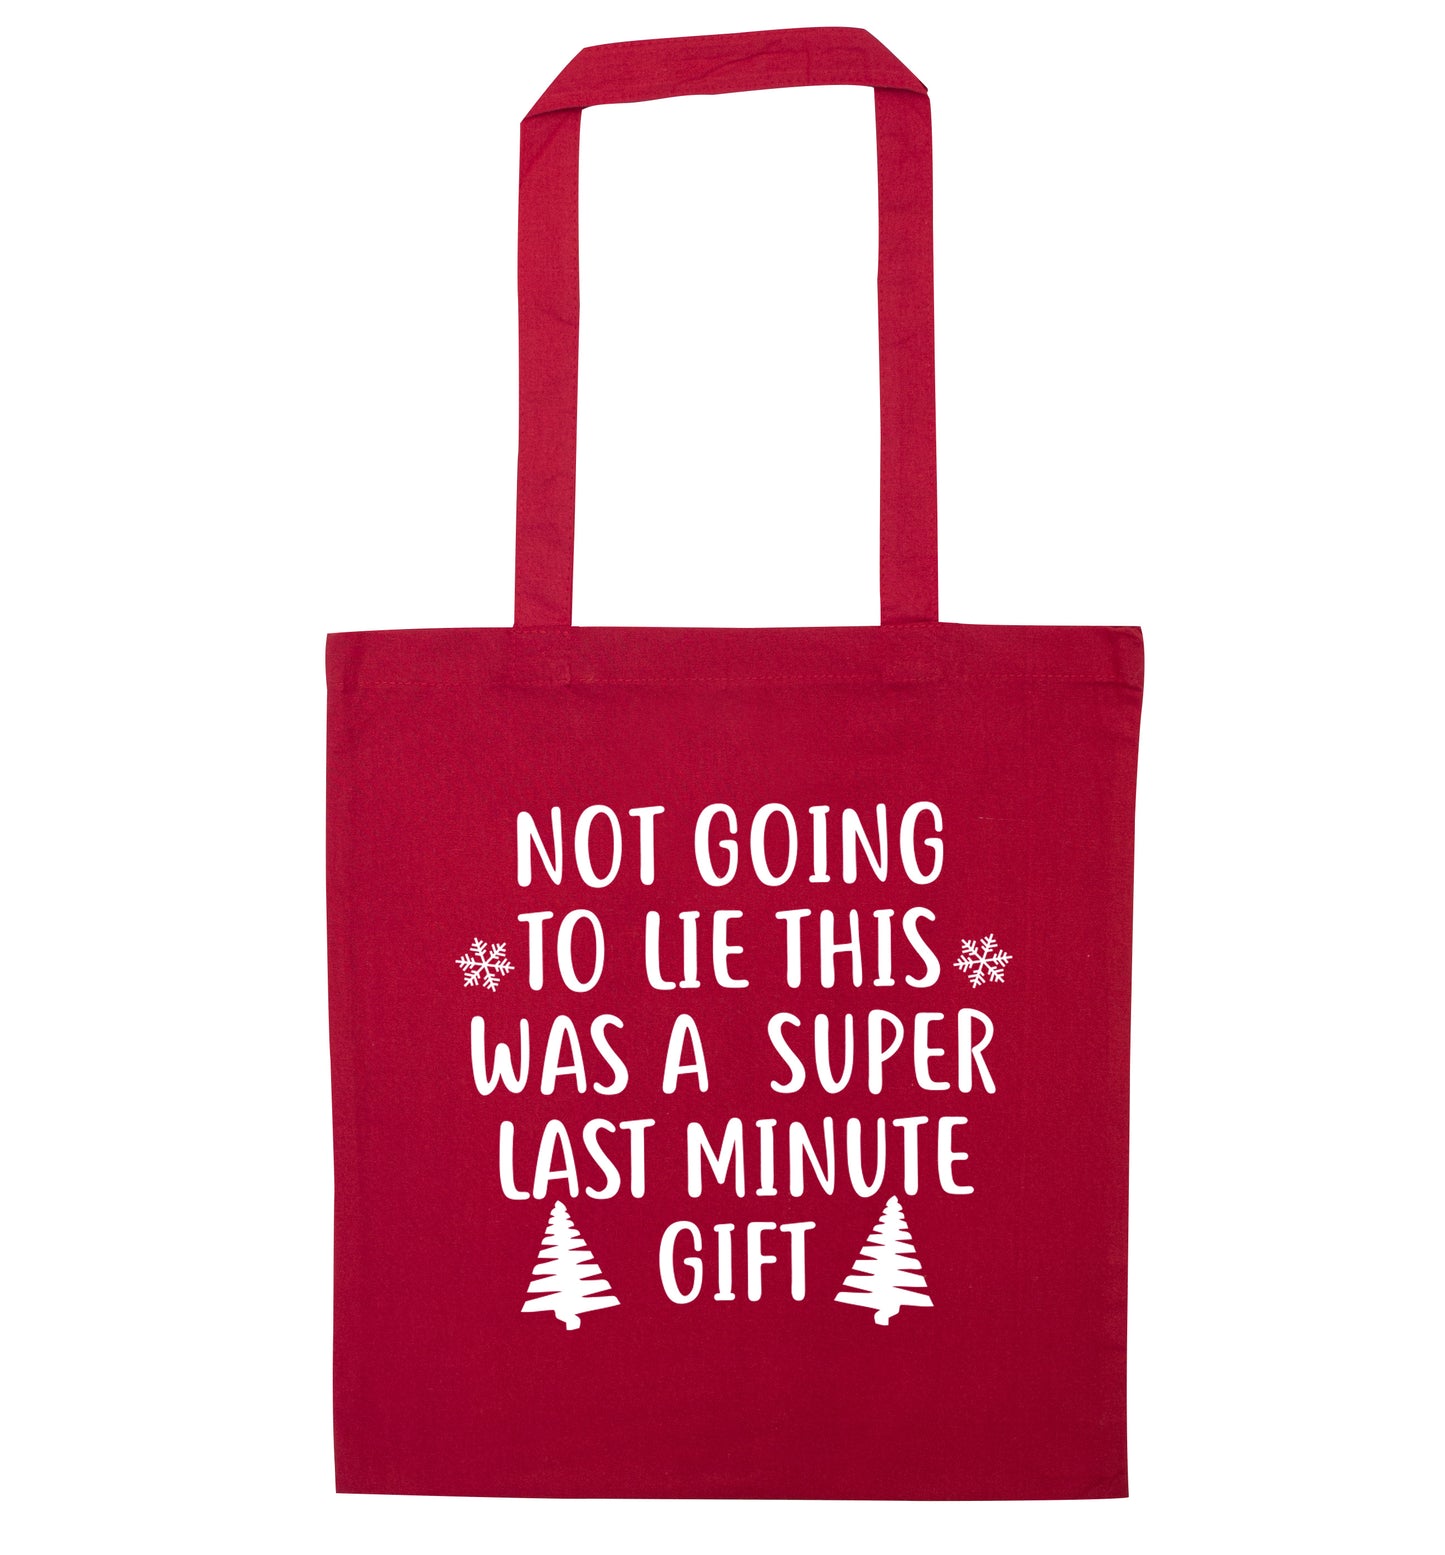 Not going to lie this was a super last minute gift red tote bag